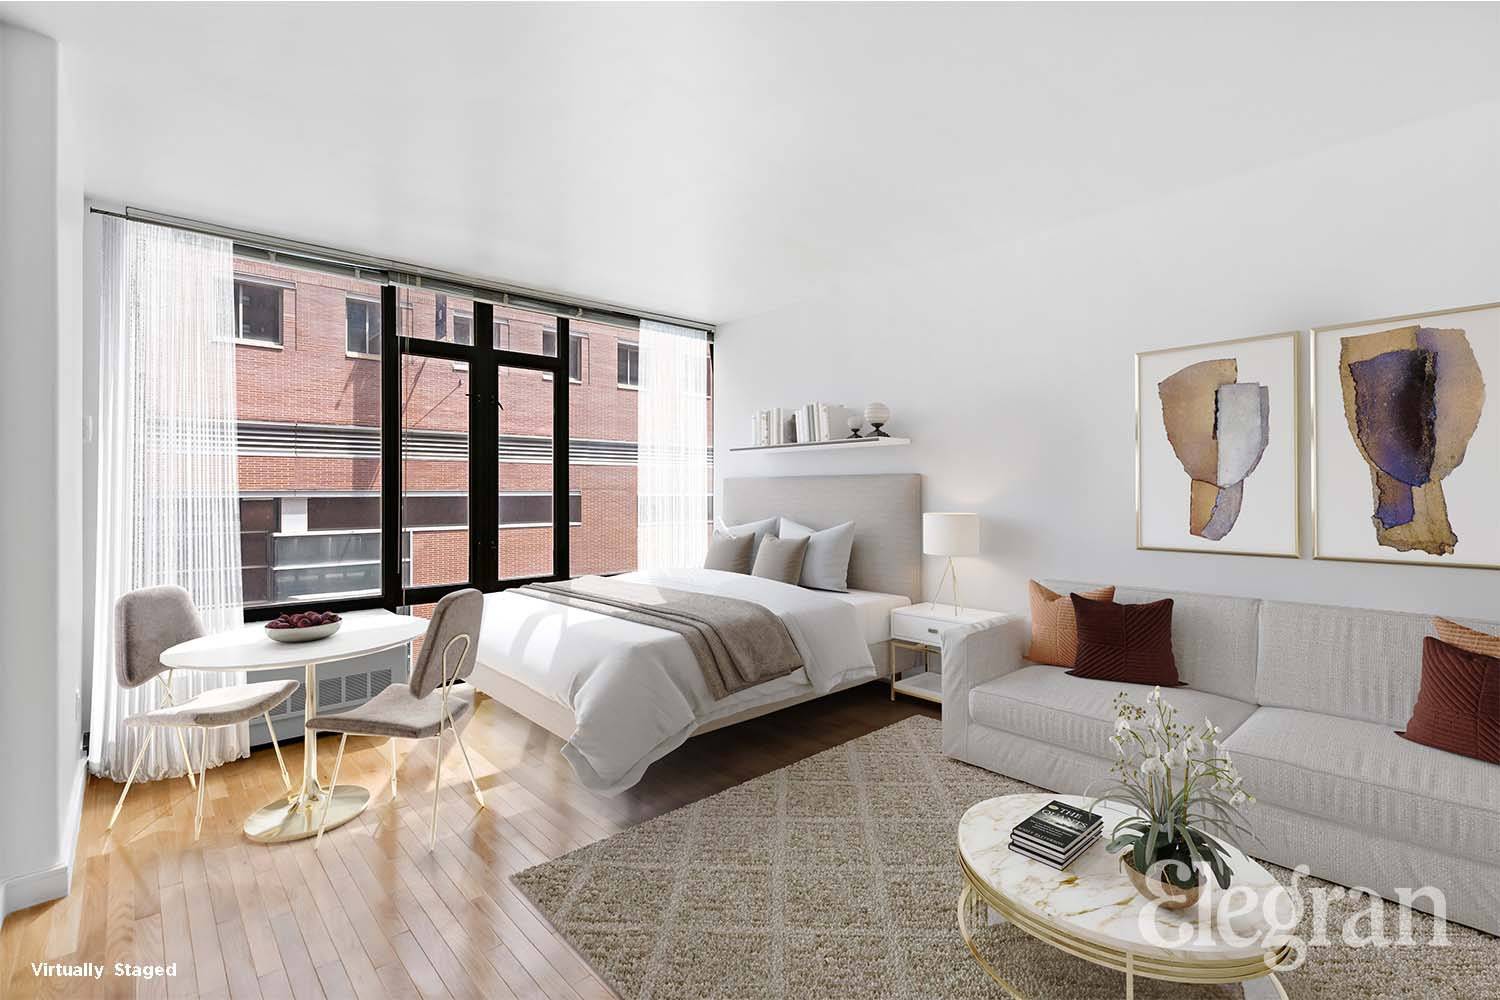 Live in in the heart of the best that Downtown Manhattan has to offer in this stylish apartment located where Flatiron, NoMad, and Gramercy Park meet.